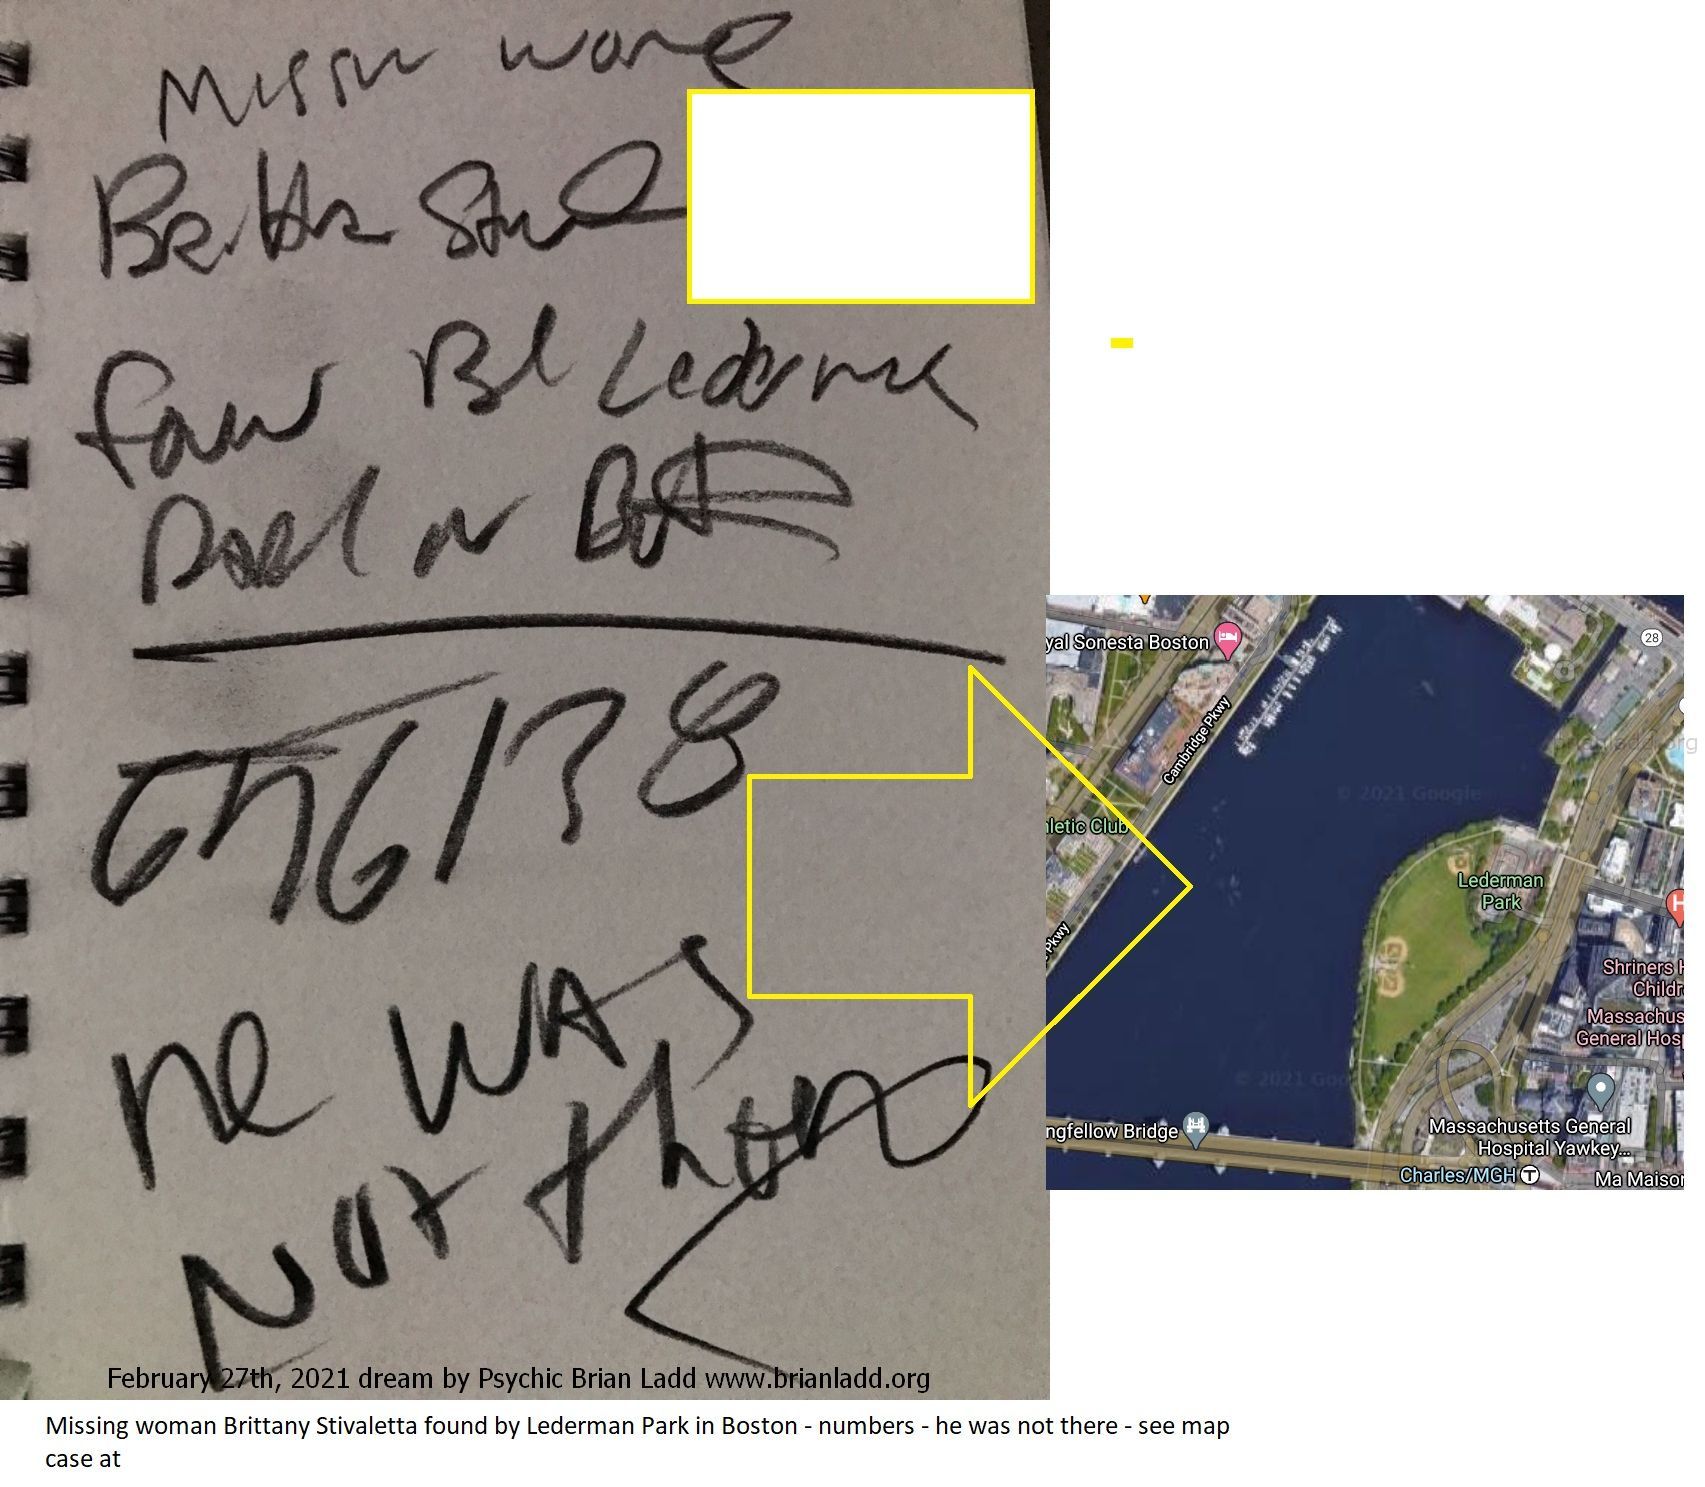 14542 27 February 2021 2 - Missing Woman Brittany Stivaletta Found By Lederman Park In Boston - Numbers - He Was Not The...
Missing Woman Brittany Stivaletta Found By Lederman Park In Boston - Numbers - He Was Not There - See Map.  Case At   https://briansprediction.com/Brittany-Stivaletta-found
